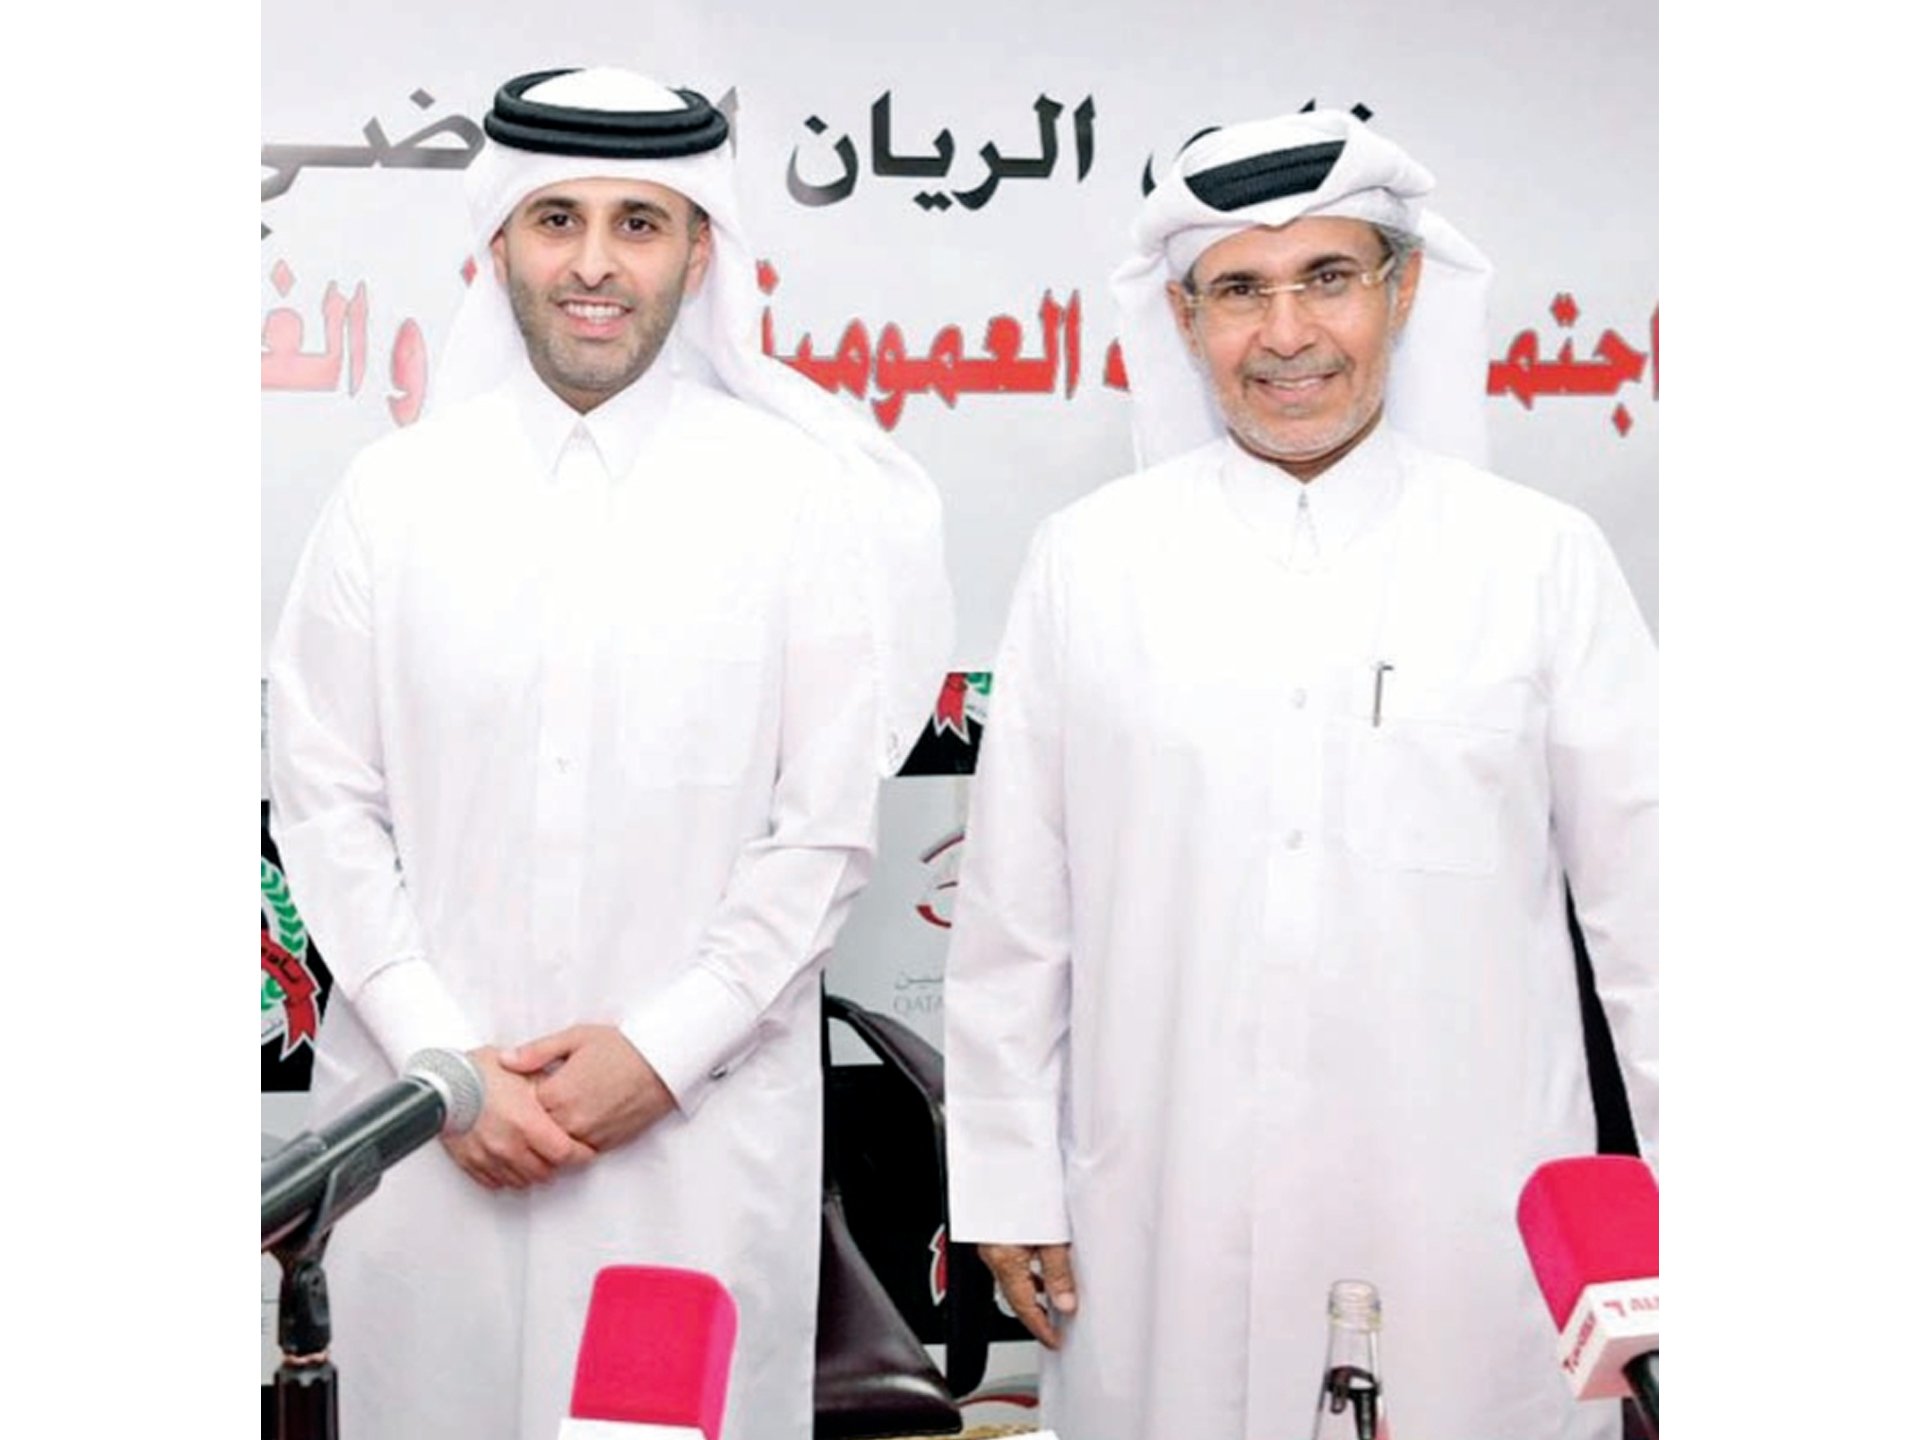 Al Rayyan SC president submits candidacy for a new term